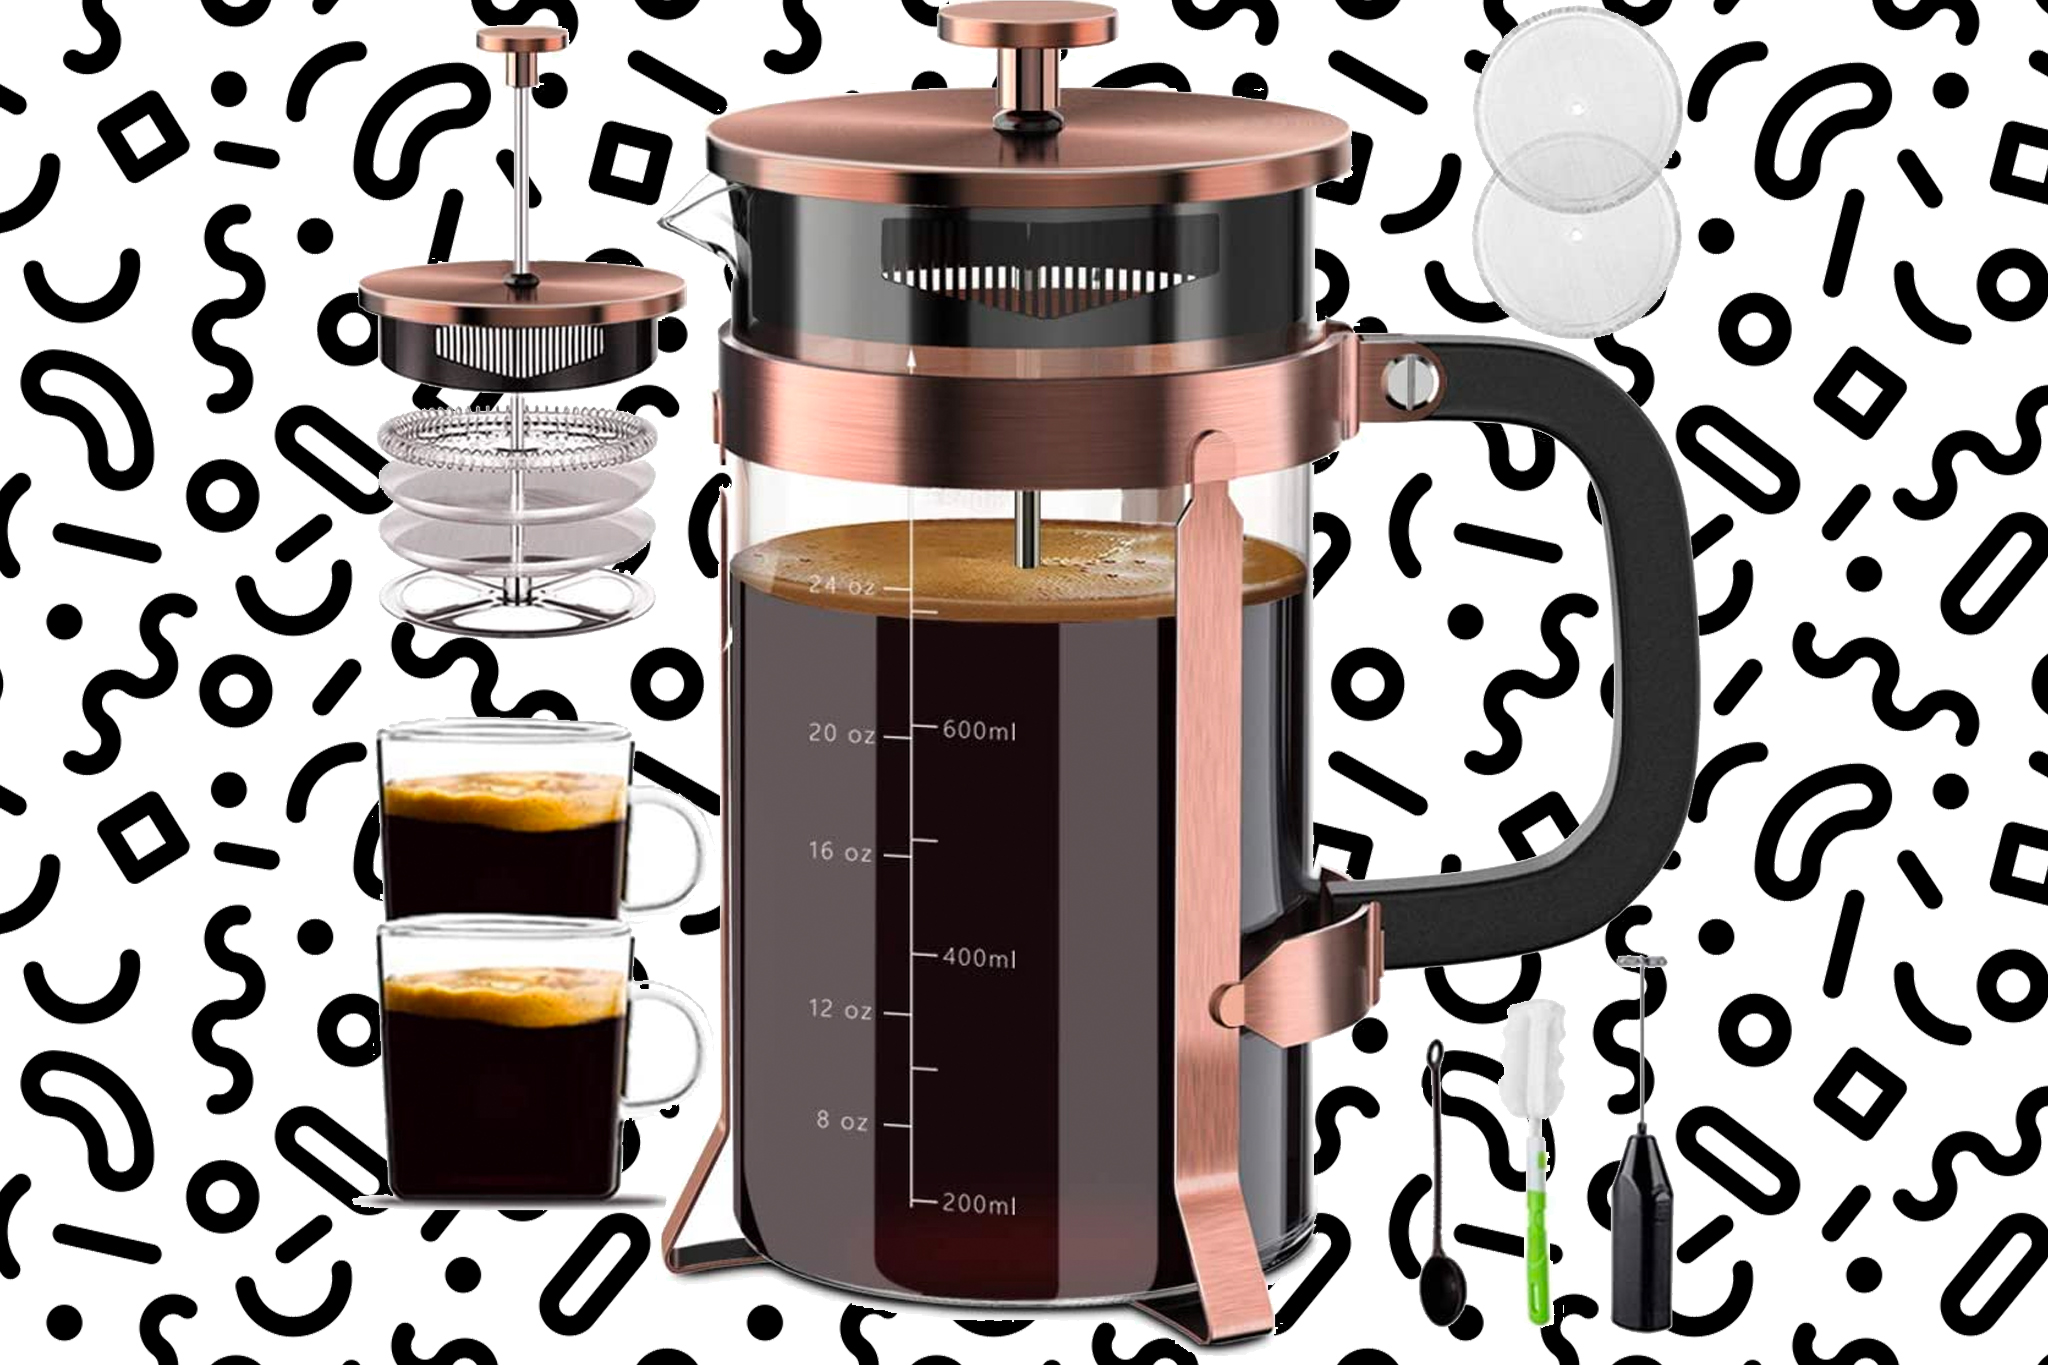 Before Prime Day ends, you will buy this french press.